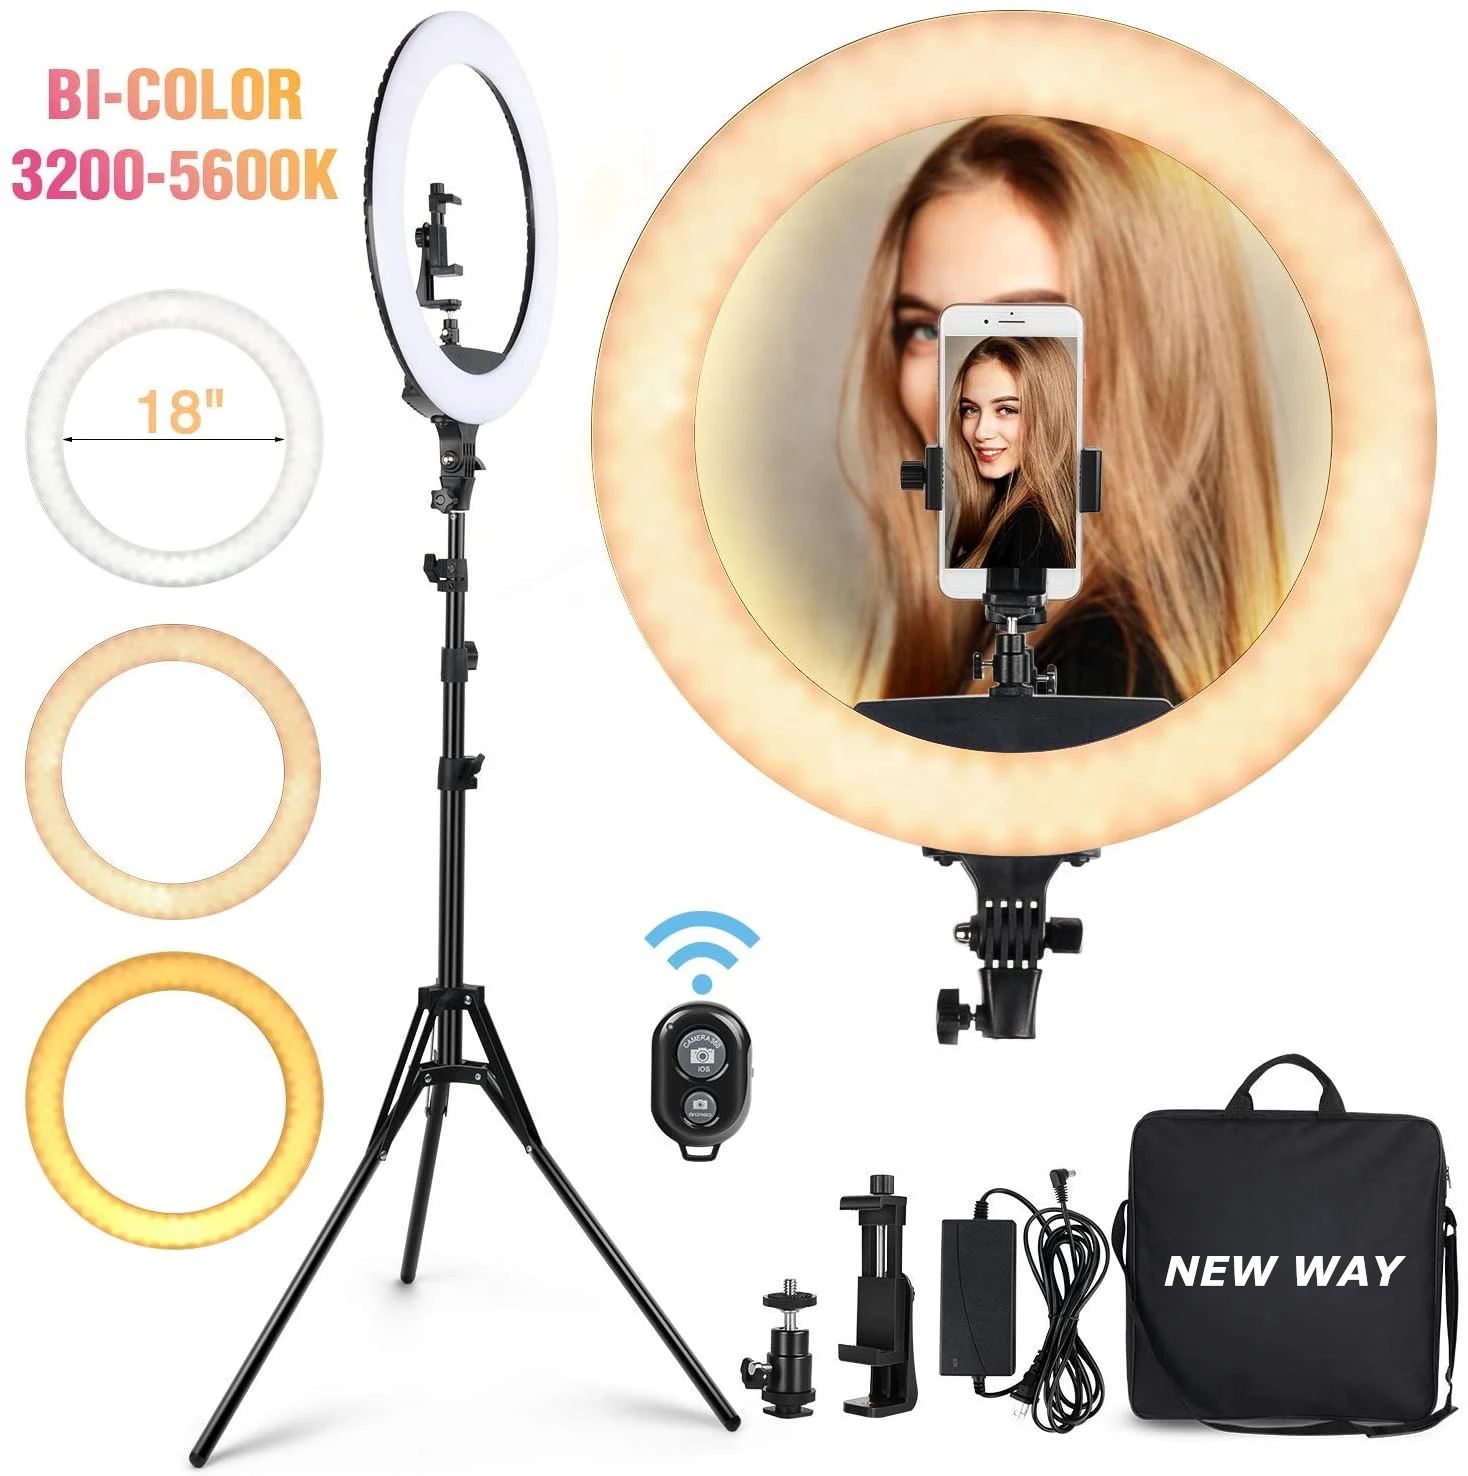 

Dimmable Photographic Light 65W Studio Makeup LED Ring Light 18 Inch LED Ringlight Kit with Tripod Stand Phone Holder, 3200-5600k